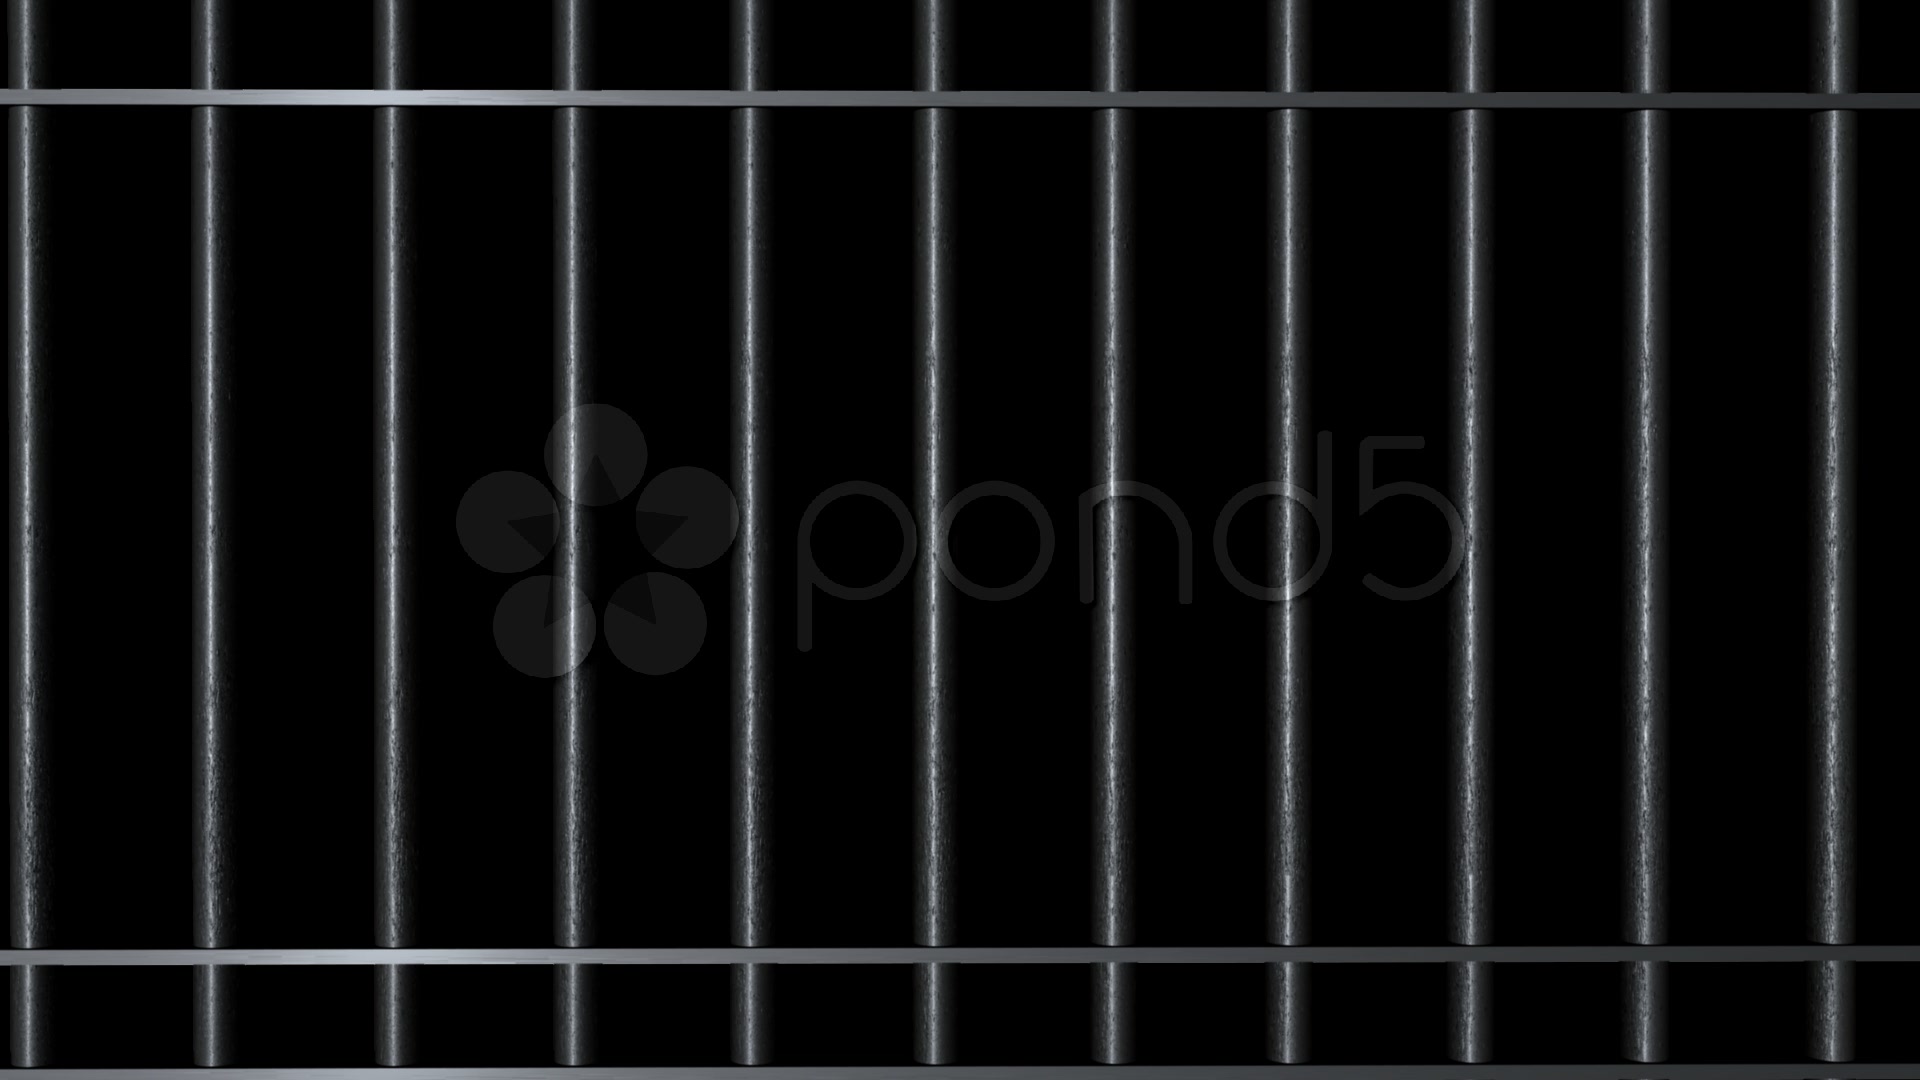 Jail Cell Wallpaper Jail cell door close with 1920x1080